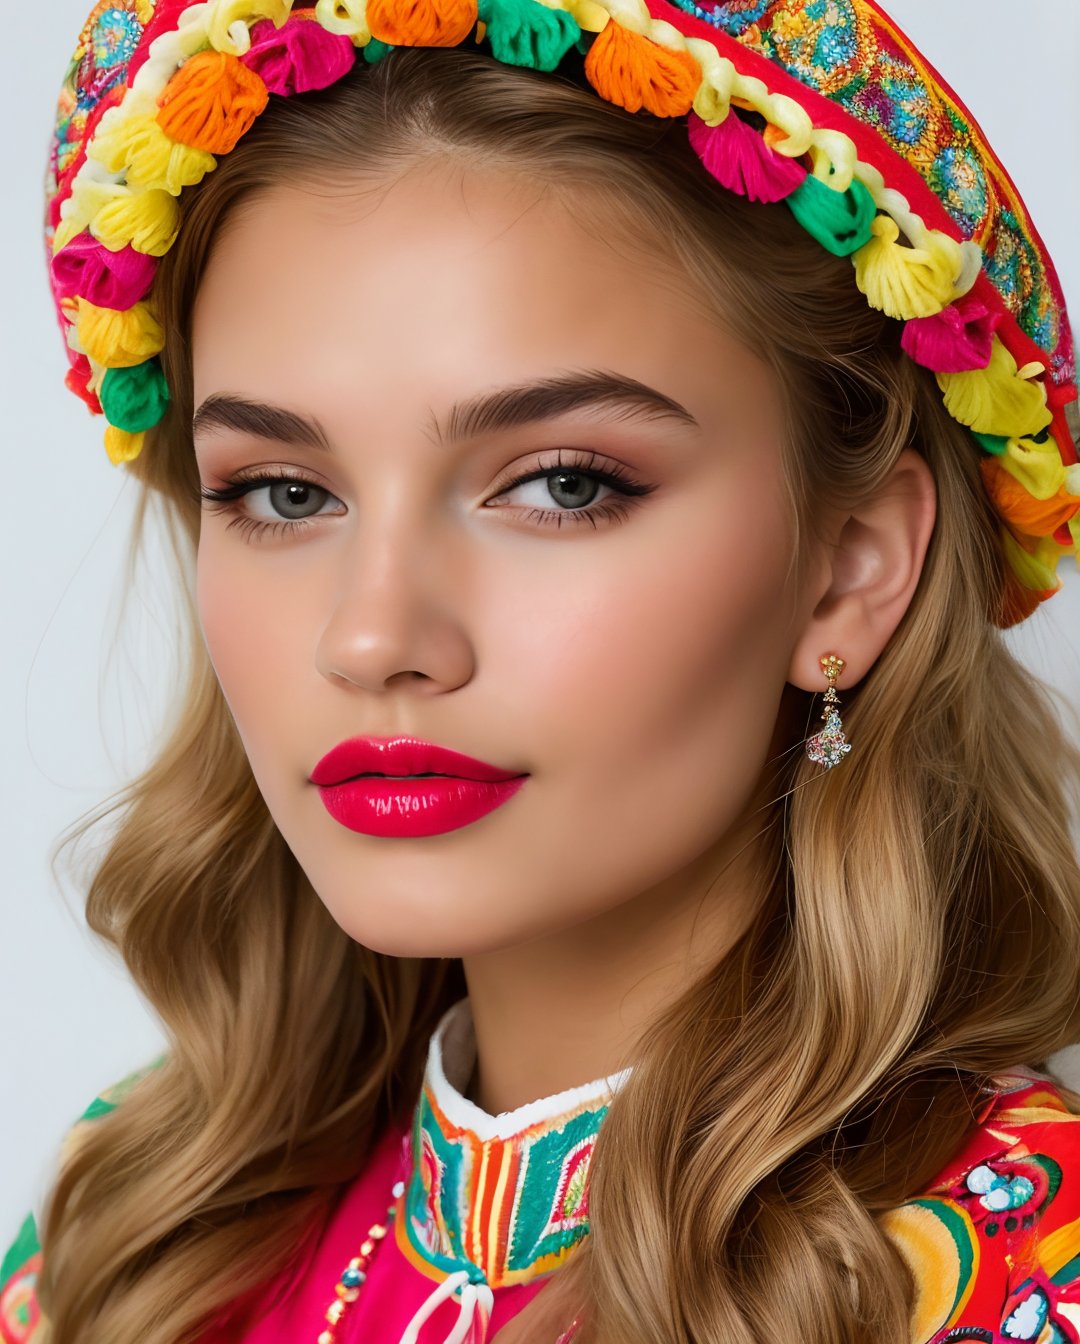 (Best quality, 8k, 32k, Masterpiece, UHD:1.2), A young blonde swedish woman wearing a colorful hair bandana and traditional Mexican dress. wearing colorful fruits as ornaments,  She has a serious expression on her face. The background is a light pink. eyes contact, focus, depth of field, film grain, ray tracing, ((contrast lipstick)), detailed natural real skin texture, perfect curly dark blonde hair, visible skin pores, anatomically correct,(PnMakeEnh)
